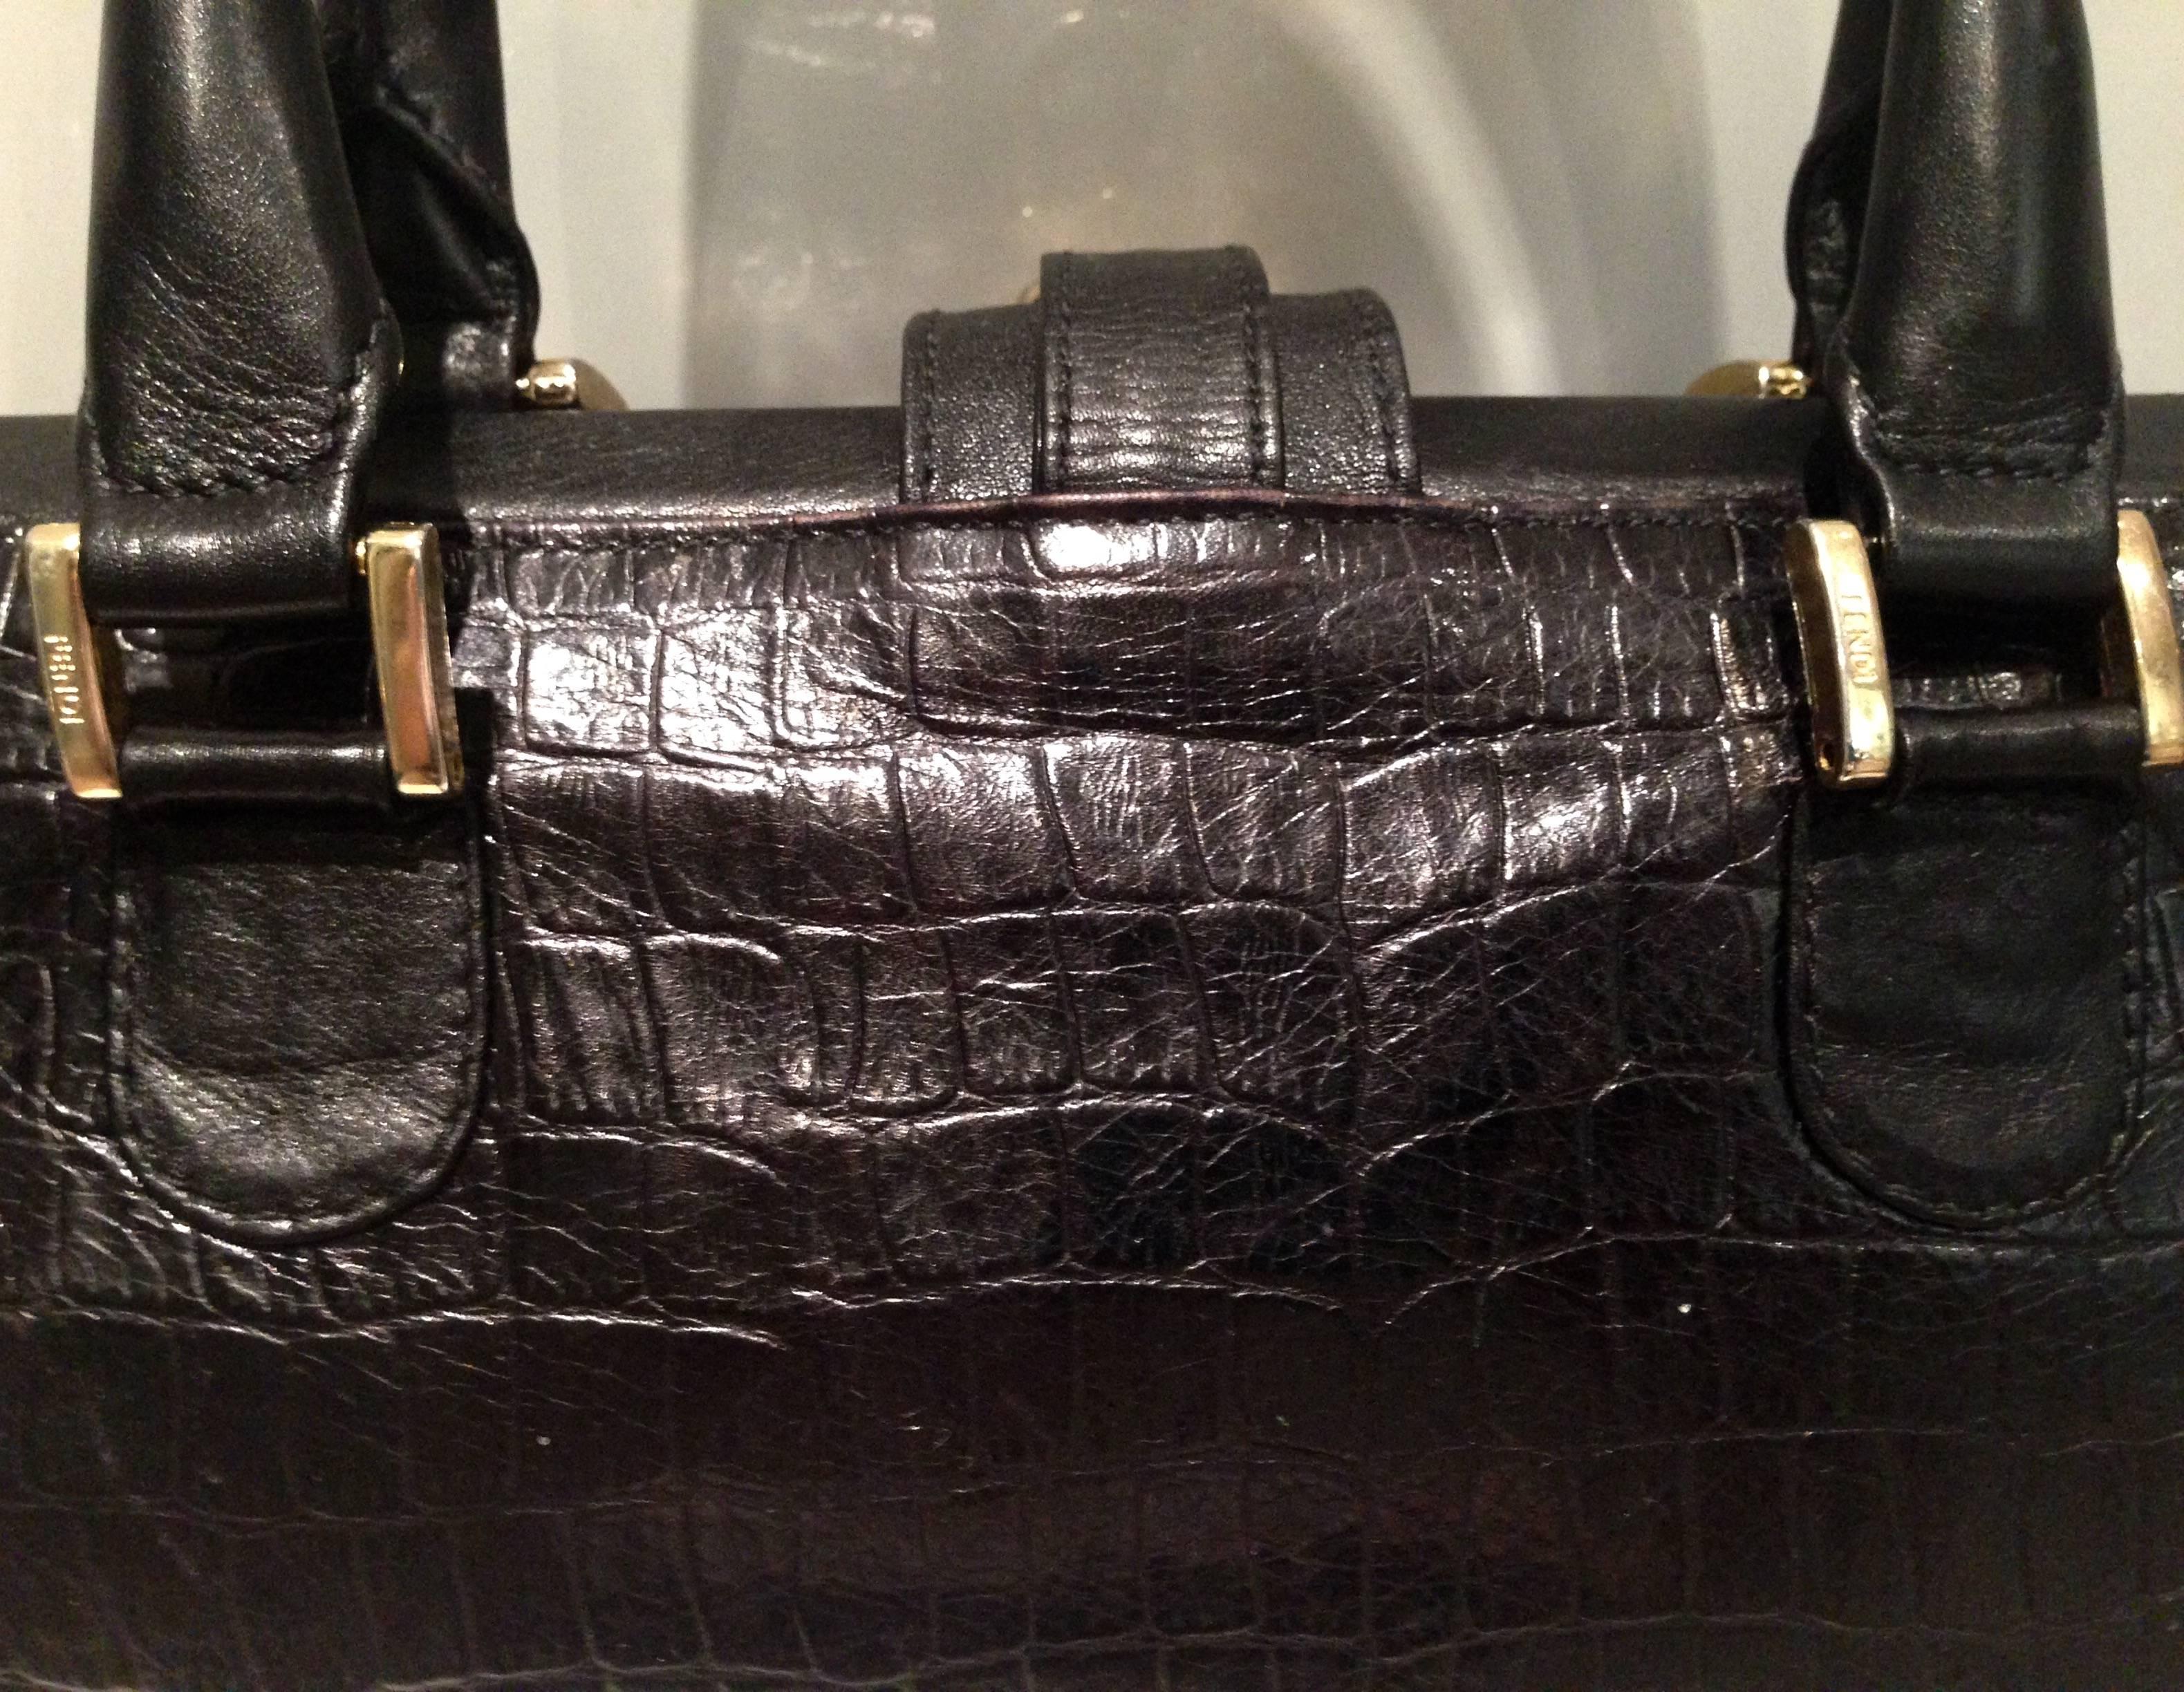 Fendi Embossed Crocodile Leather Doctors Handbag In Excellent Condition For Sale In West Palm Beach, FL